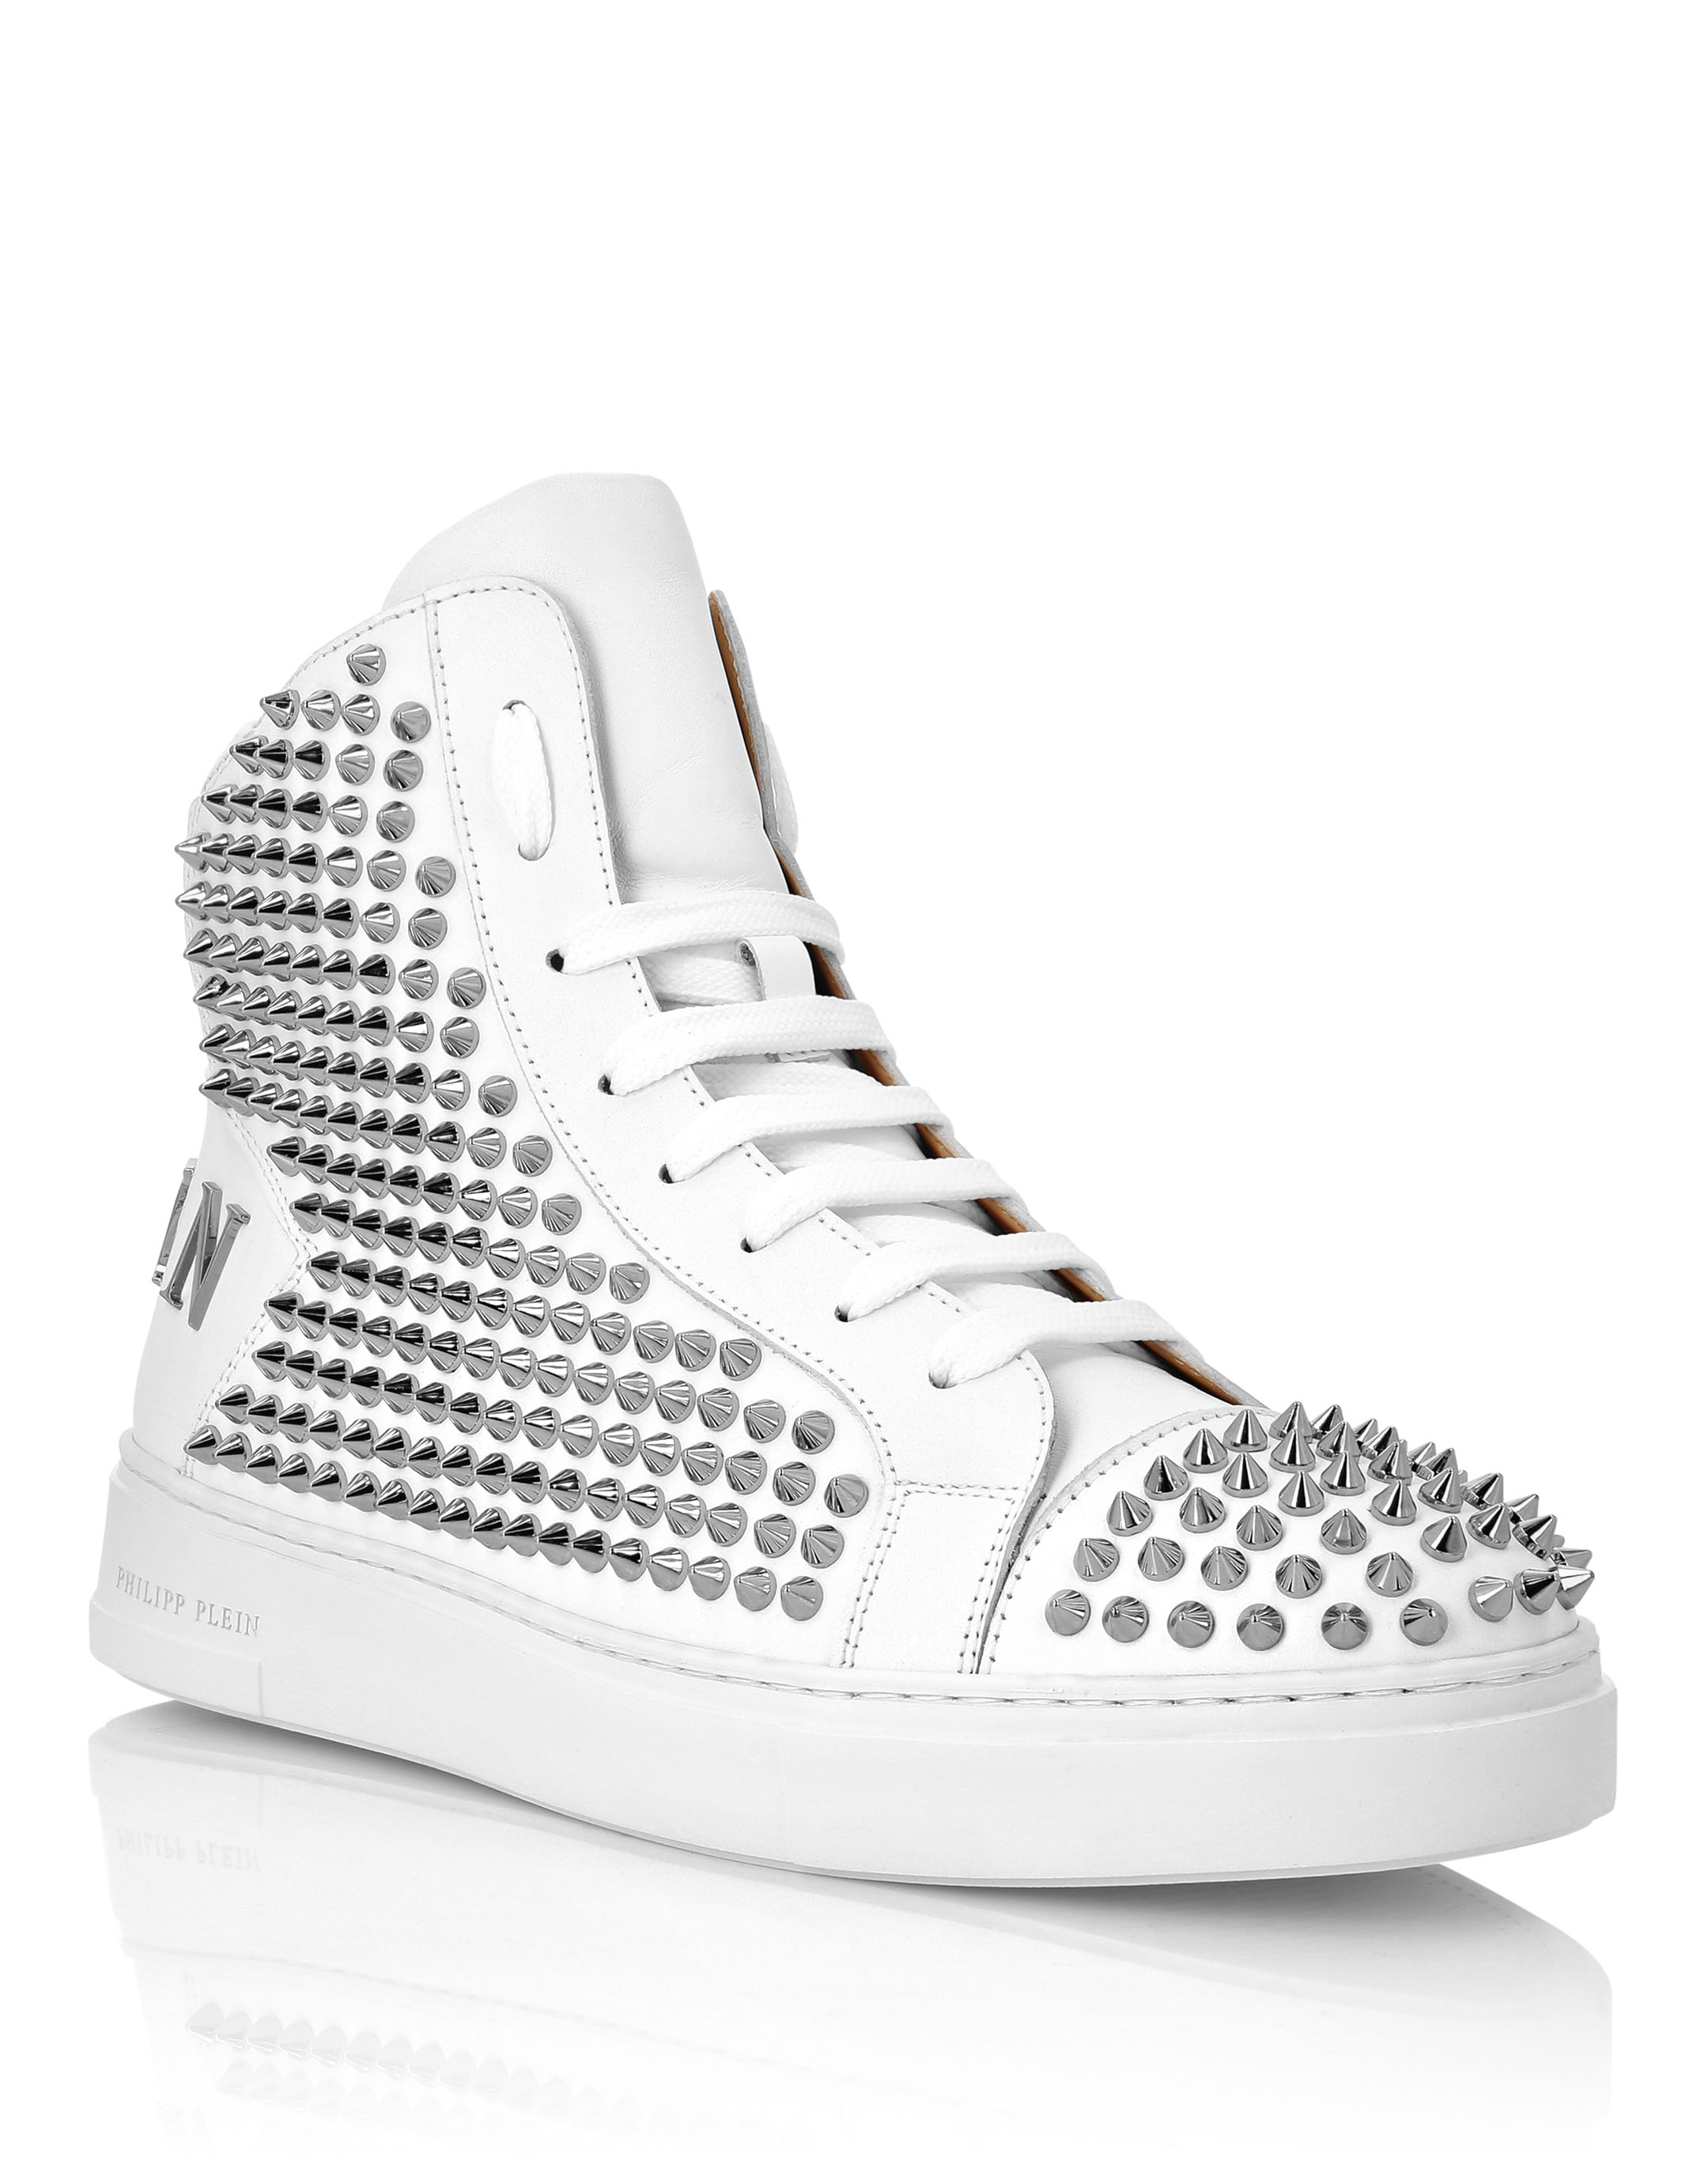 HI-TOP STUDDED SNEAKERS | Philipp Plein Outlet